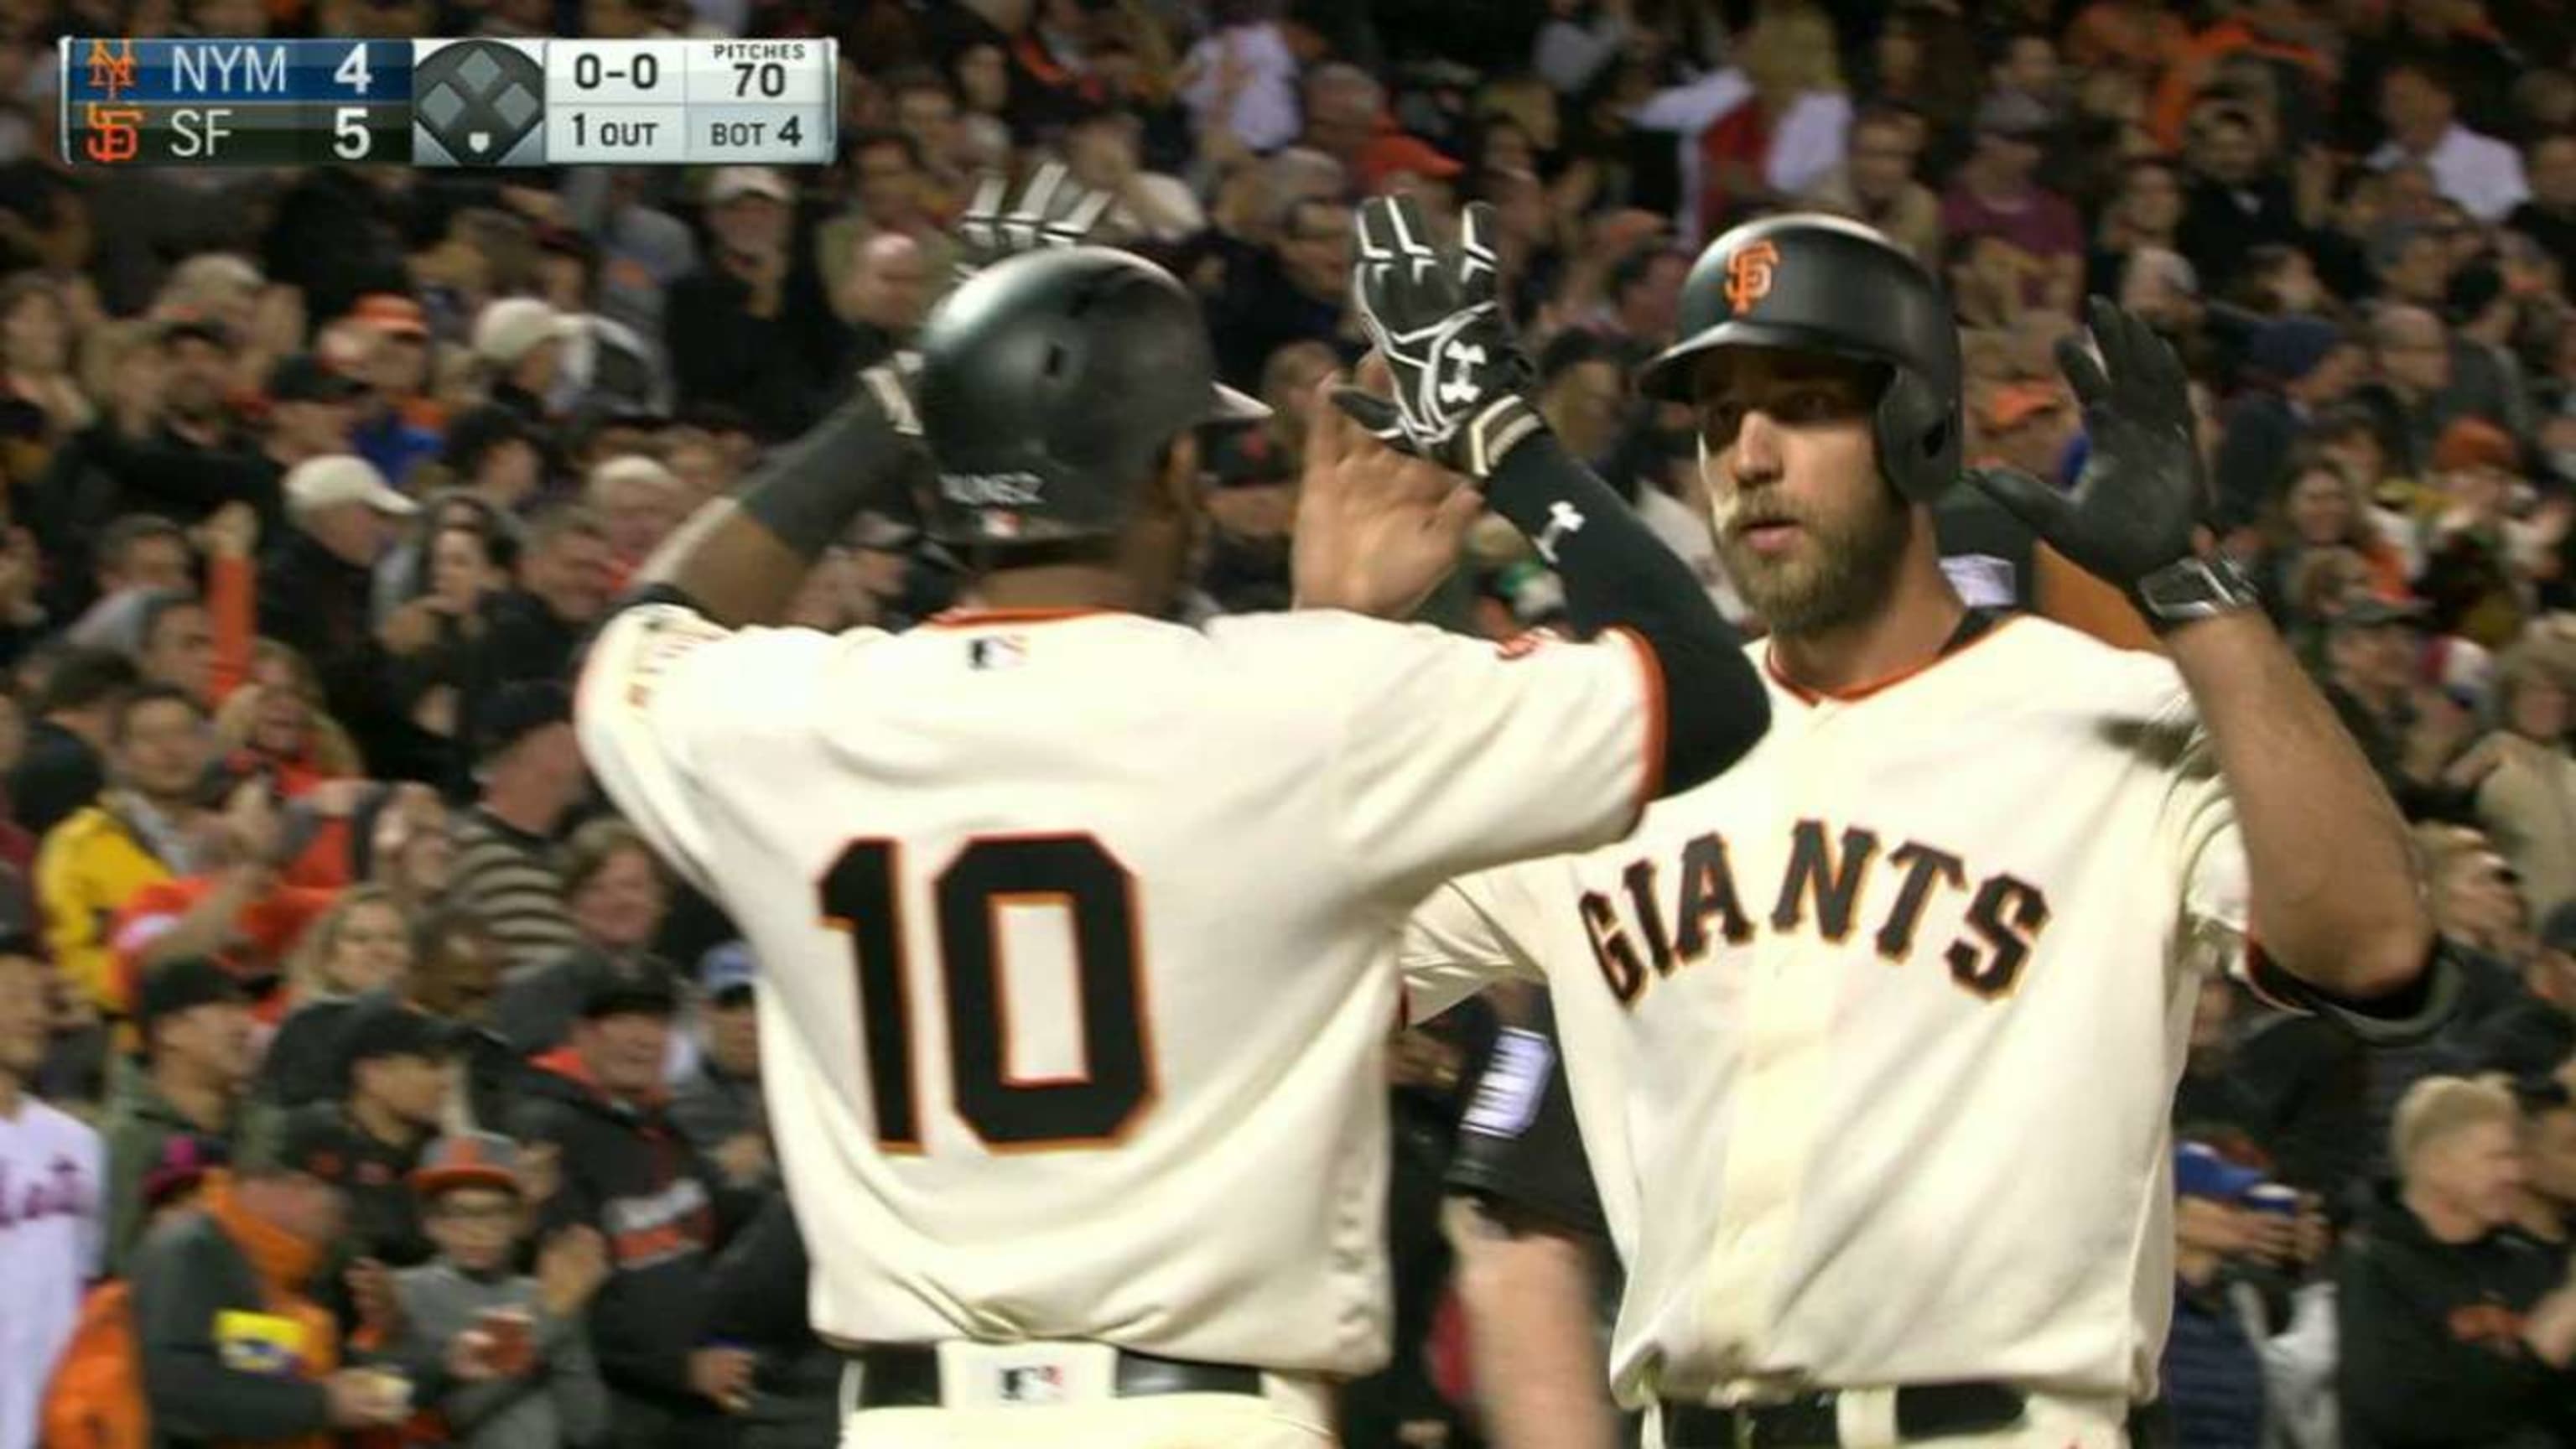 SF Giants Rewind: Madison Bumgarner vs. the Royals - McCovey